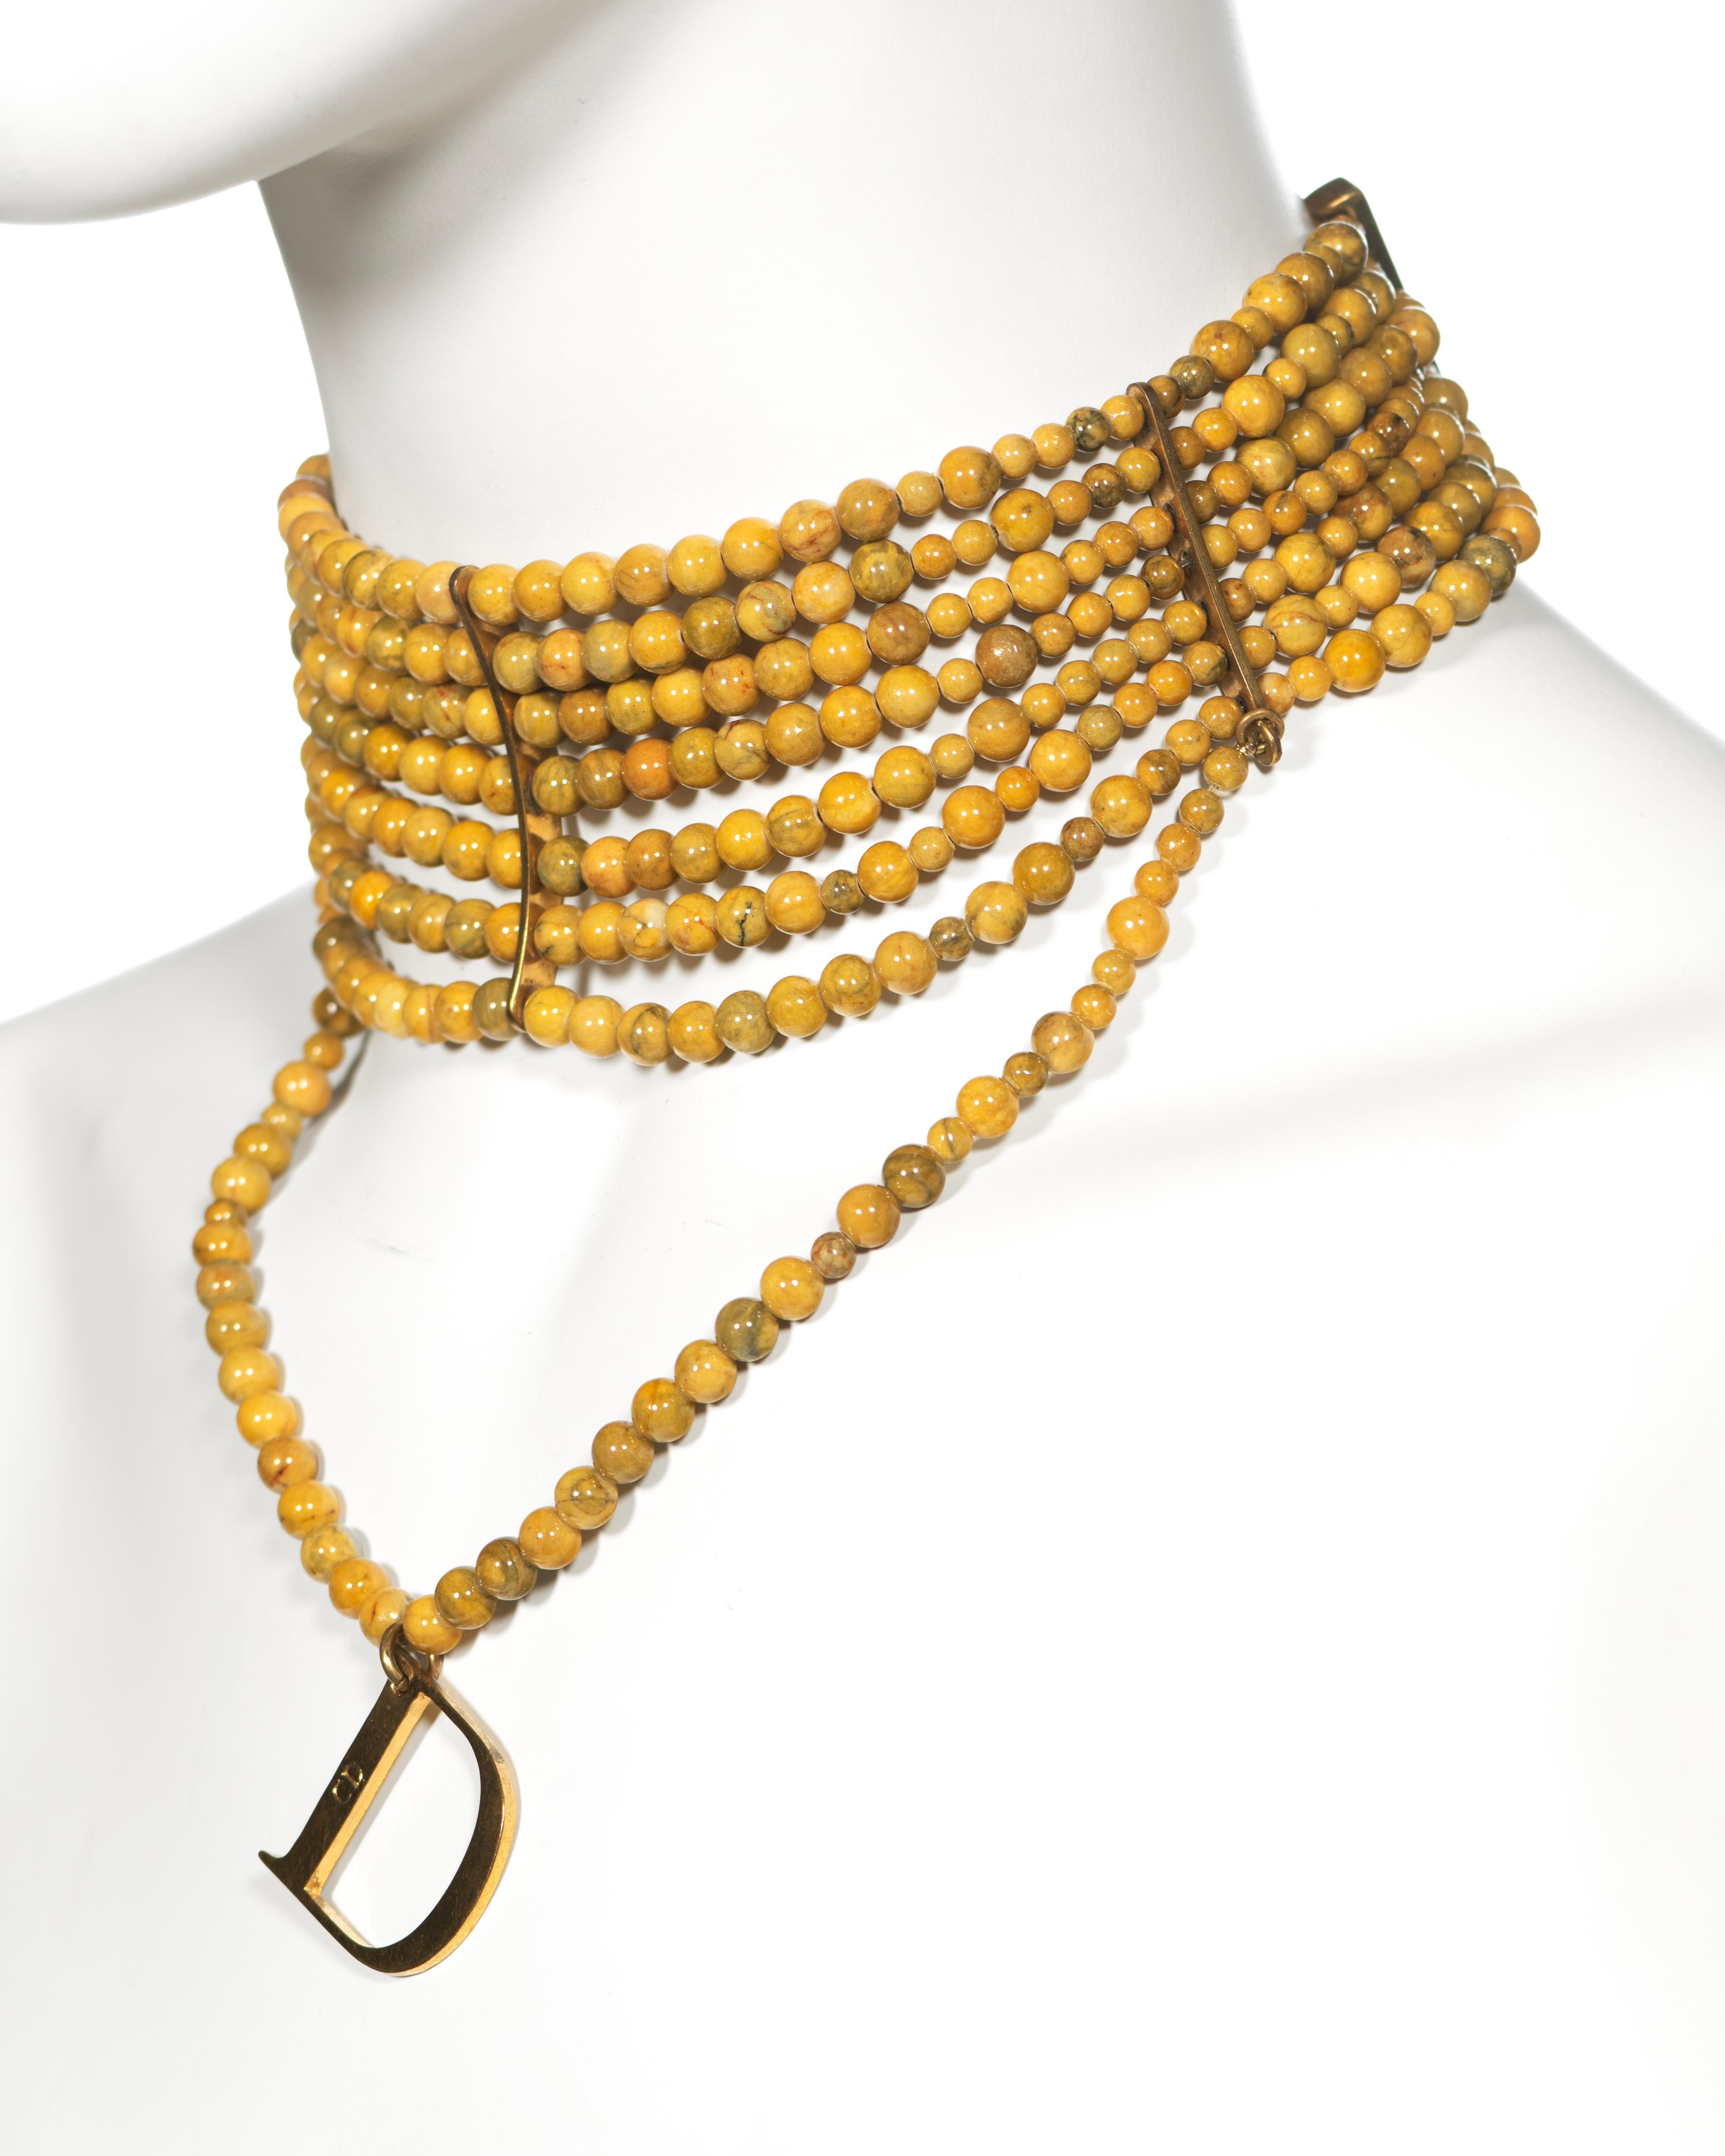 Christian Dior by John Galliano Marbled Glass Bead Choker Necklace, c. 1998 For Sale 3